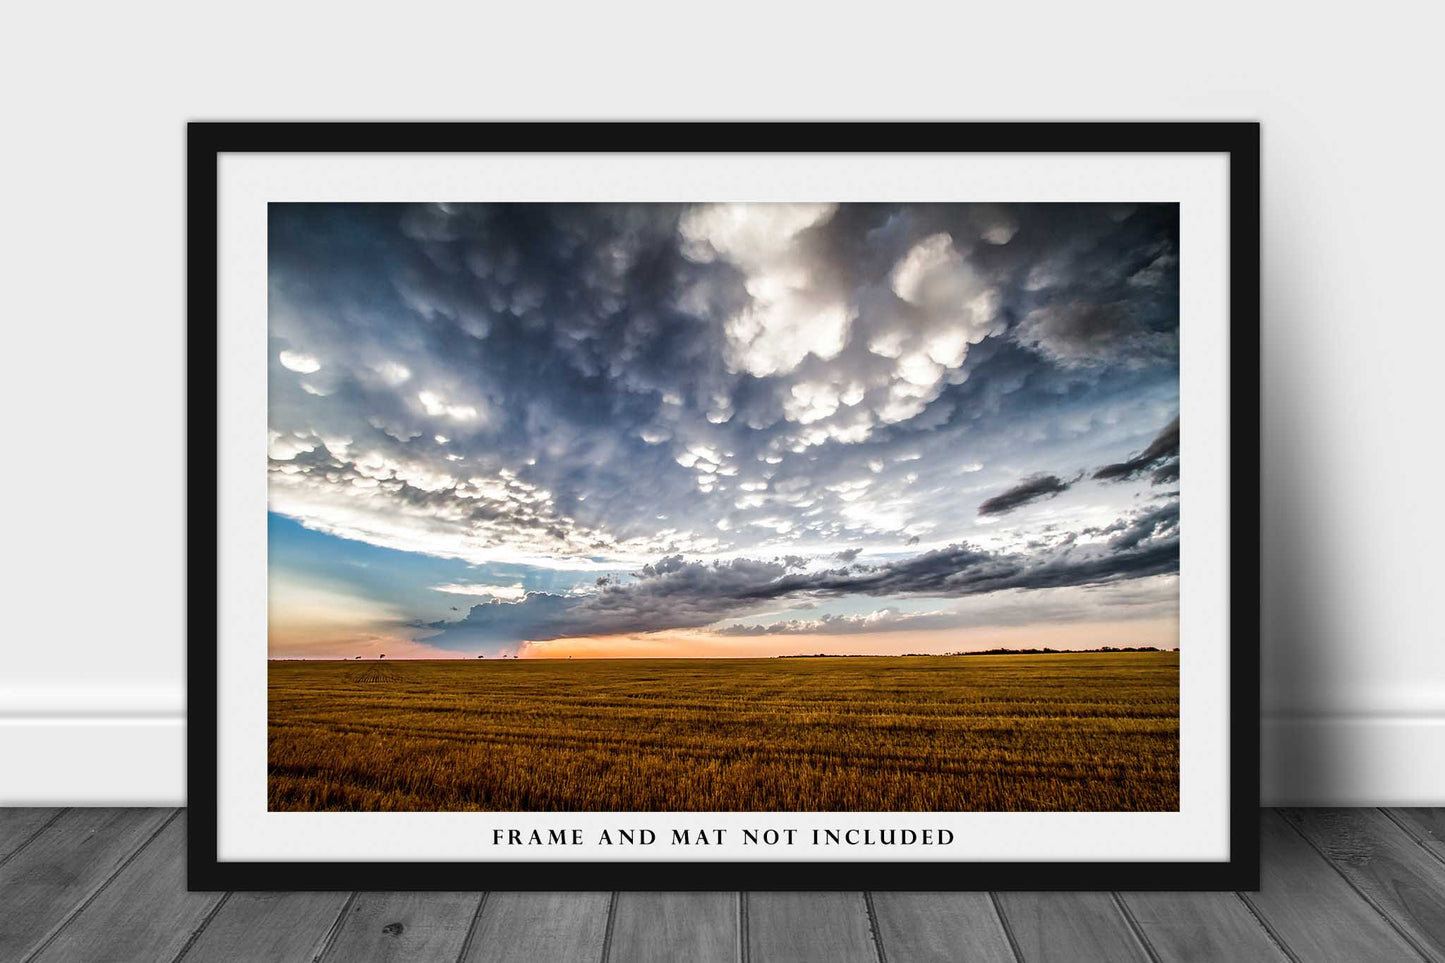 Great Plains Photography Print (Not Framed) Picture of Clouds Over Field at Sunset After Stormy Evening in Texas Sky Wall Art Western Decor